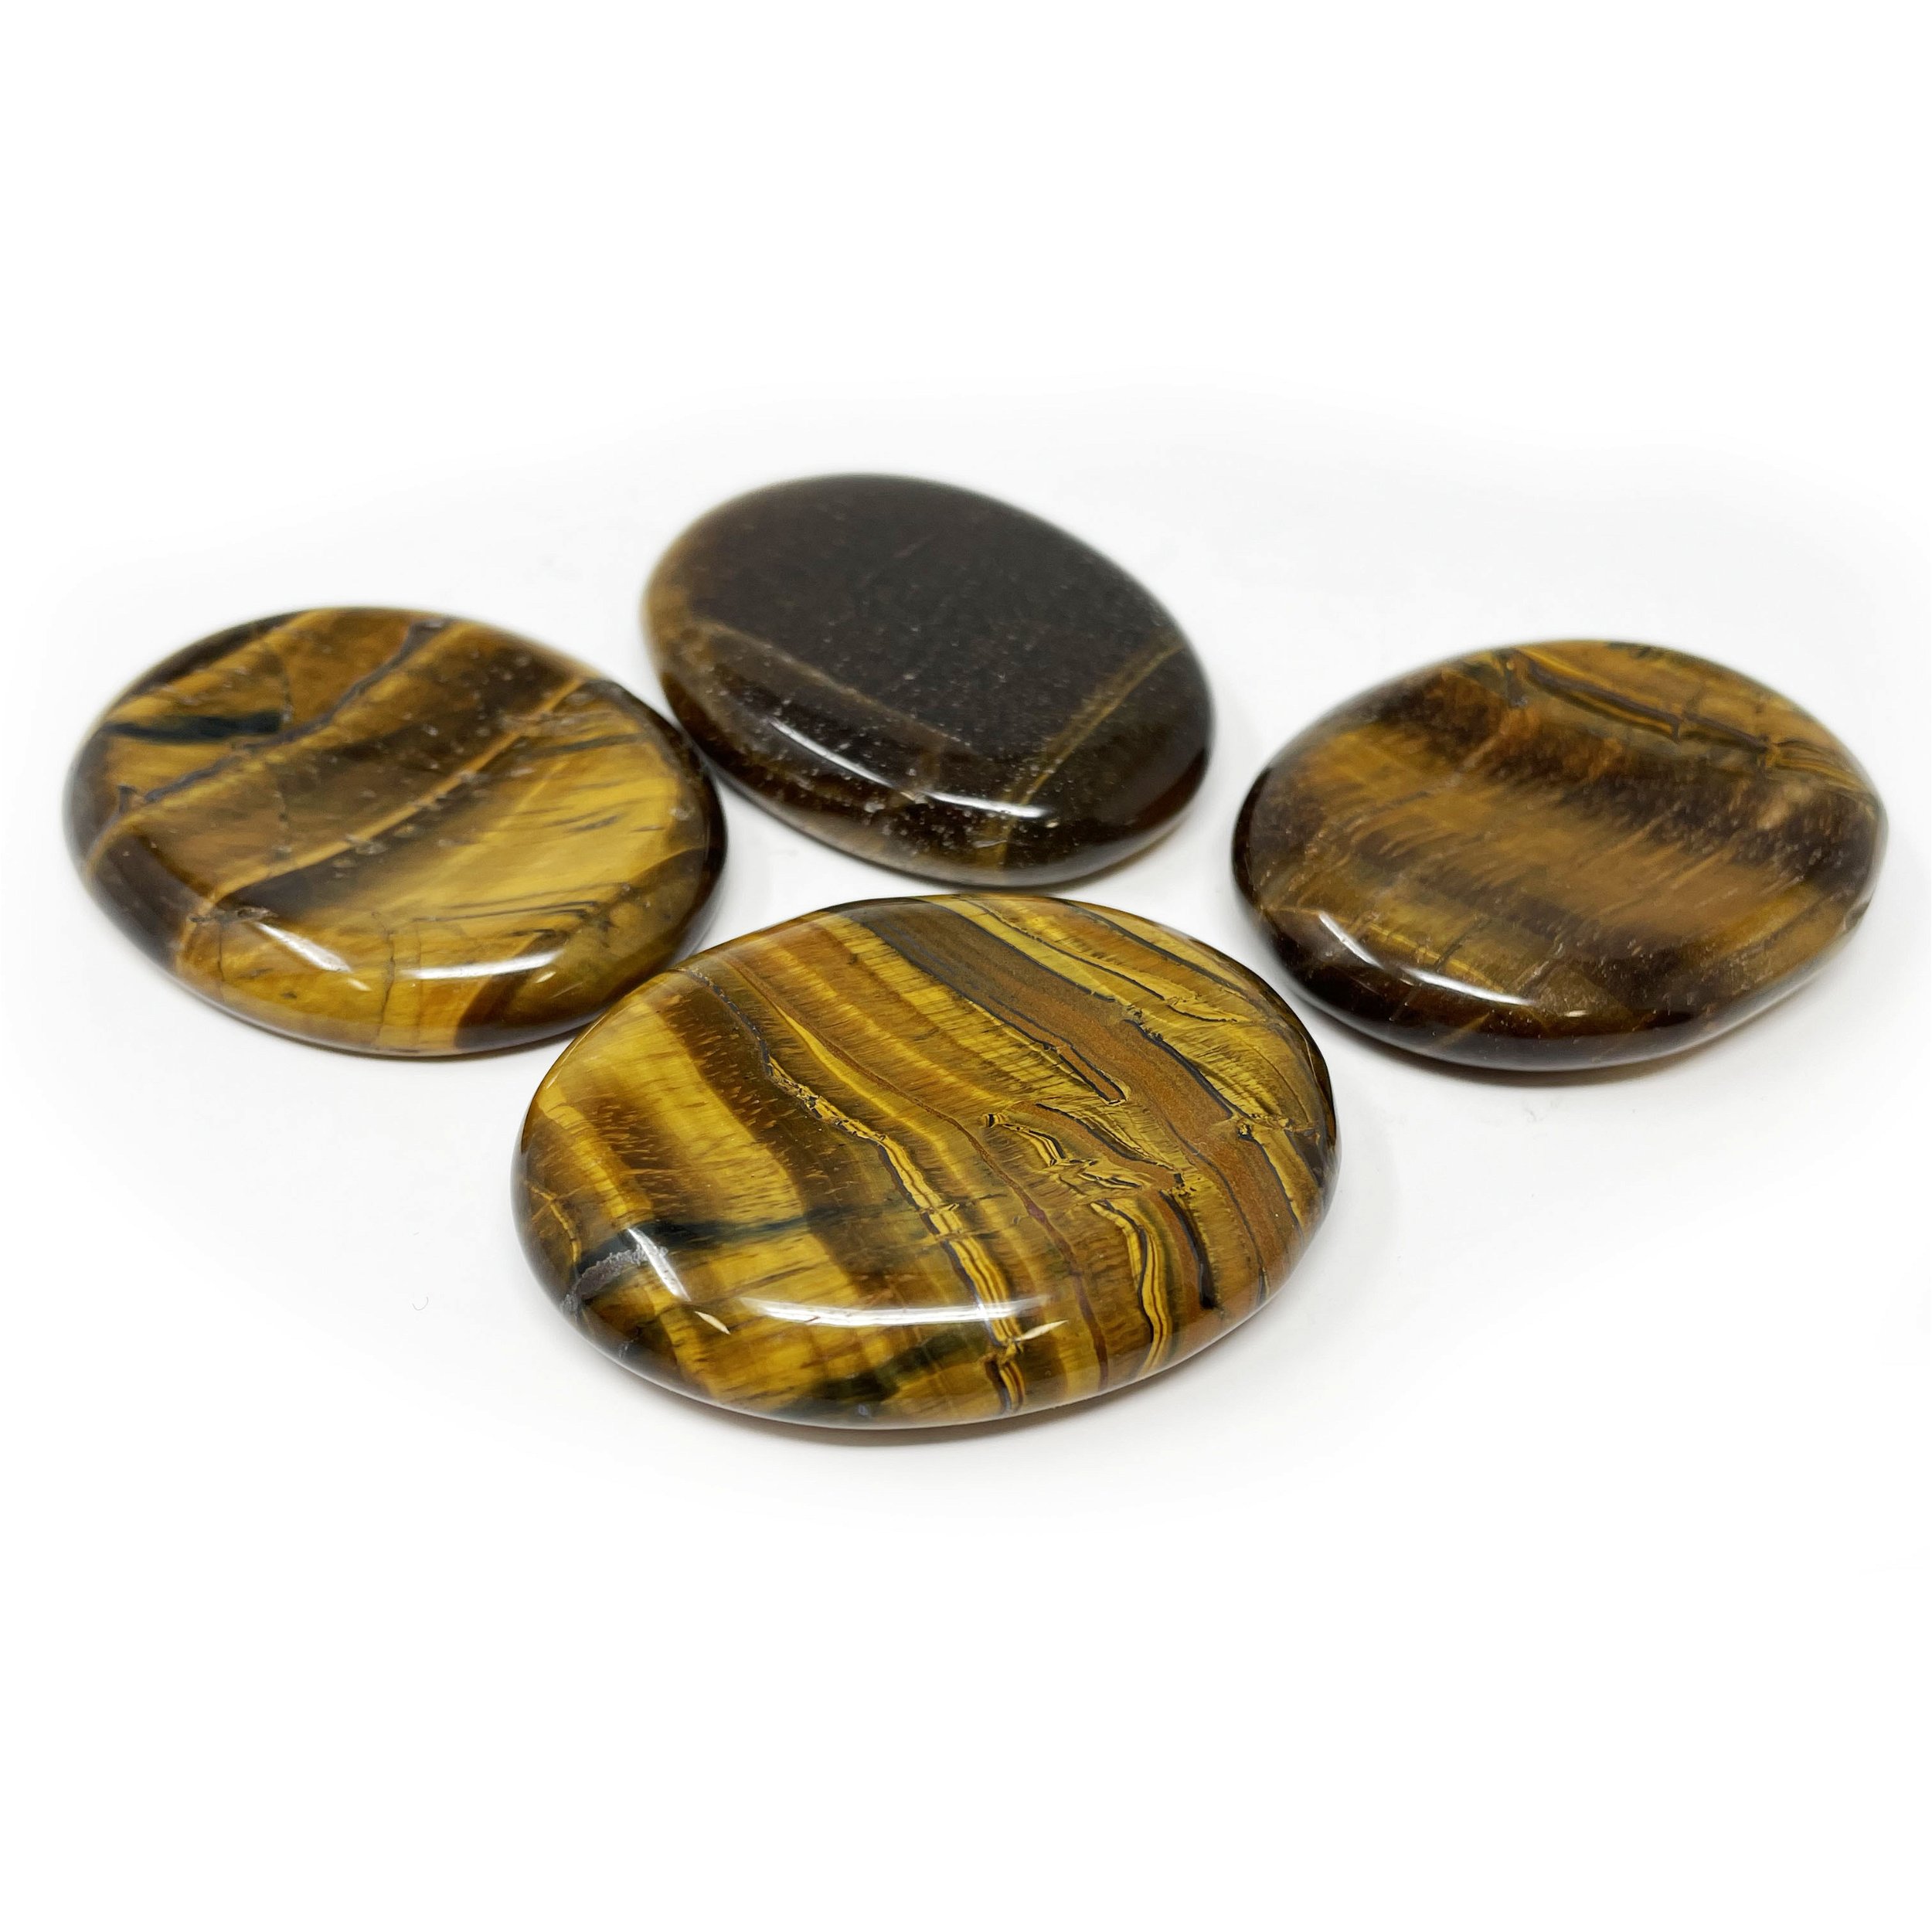 Blue Tigers Eye Palm Stone With Divot (Singles)